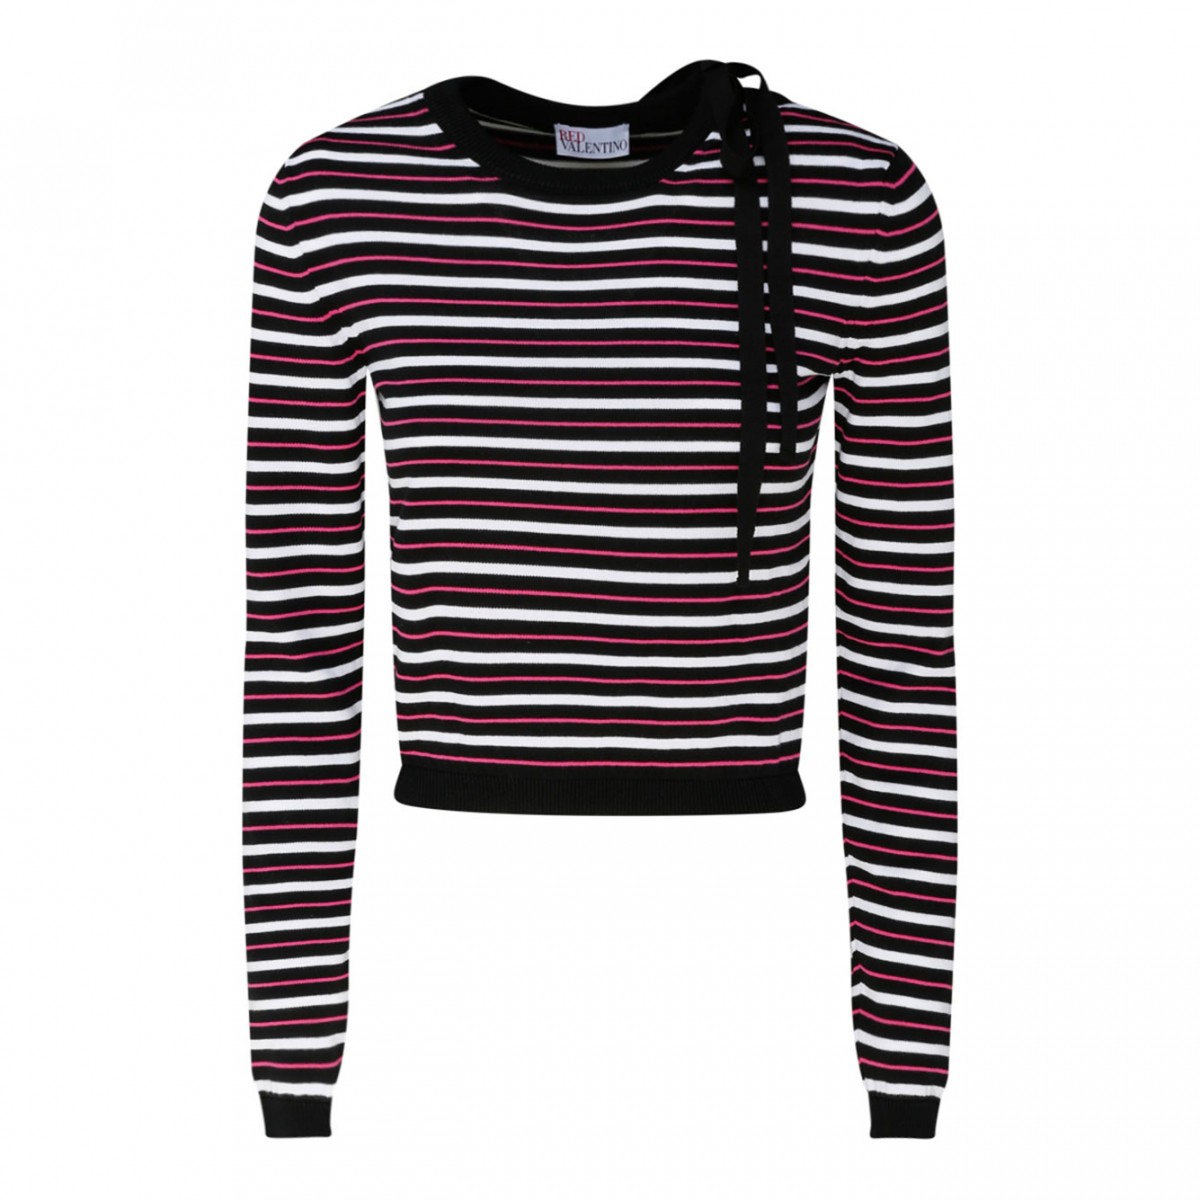 Black, Red and White Cotton Stripes Jumper